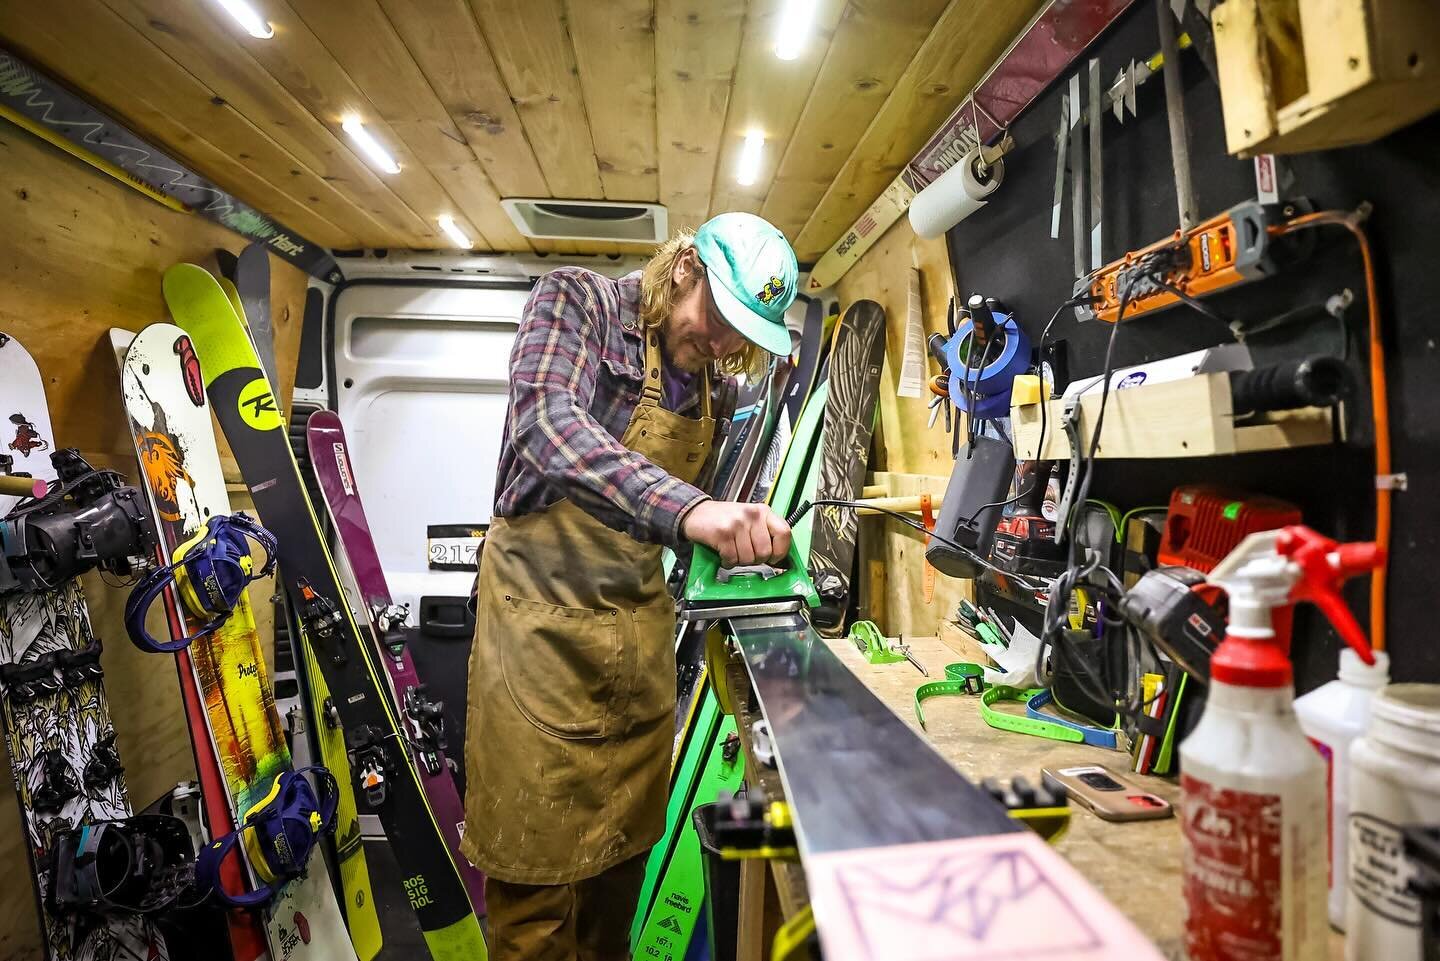 Excited to announce I will be at @thefrontclimbing south main location every Wednesday starting this week (2/14) from 6 to 8pm and then from 5 to 8pm starting 2/21. Drop your skis or board off at the van and get a tune up while you get your workout i